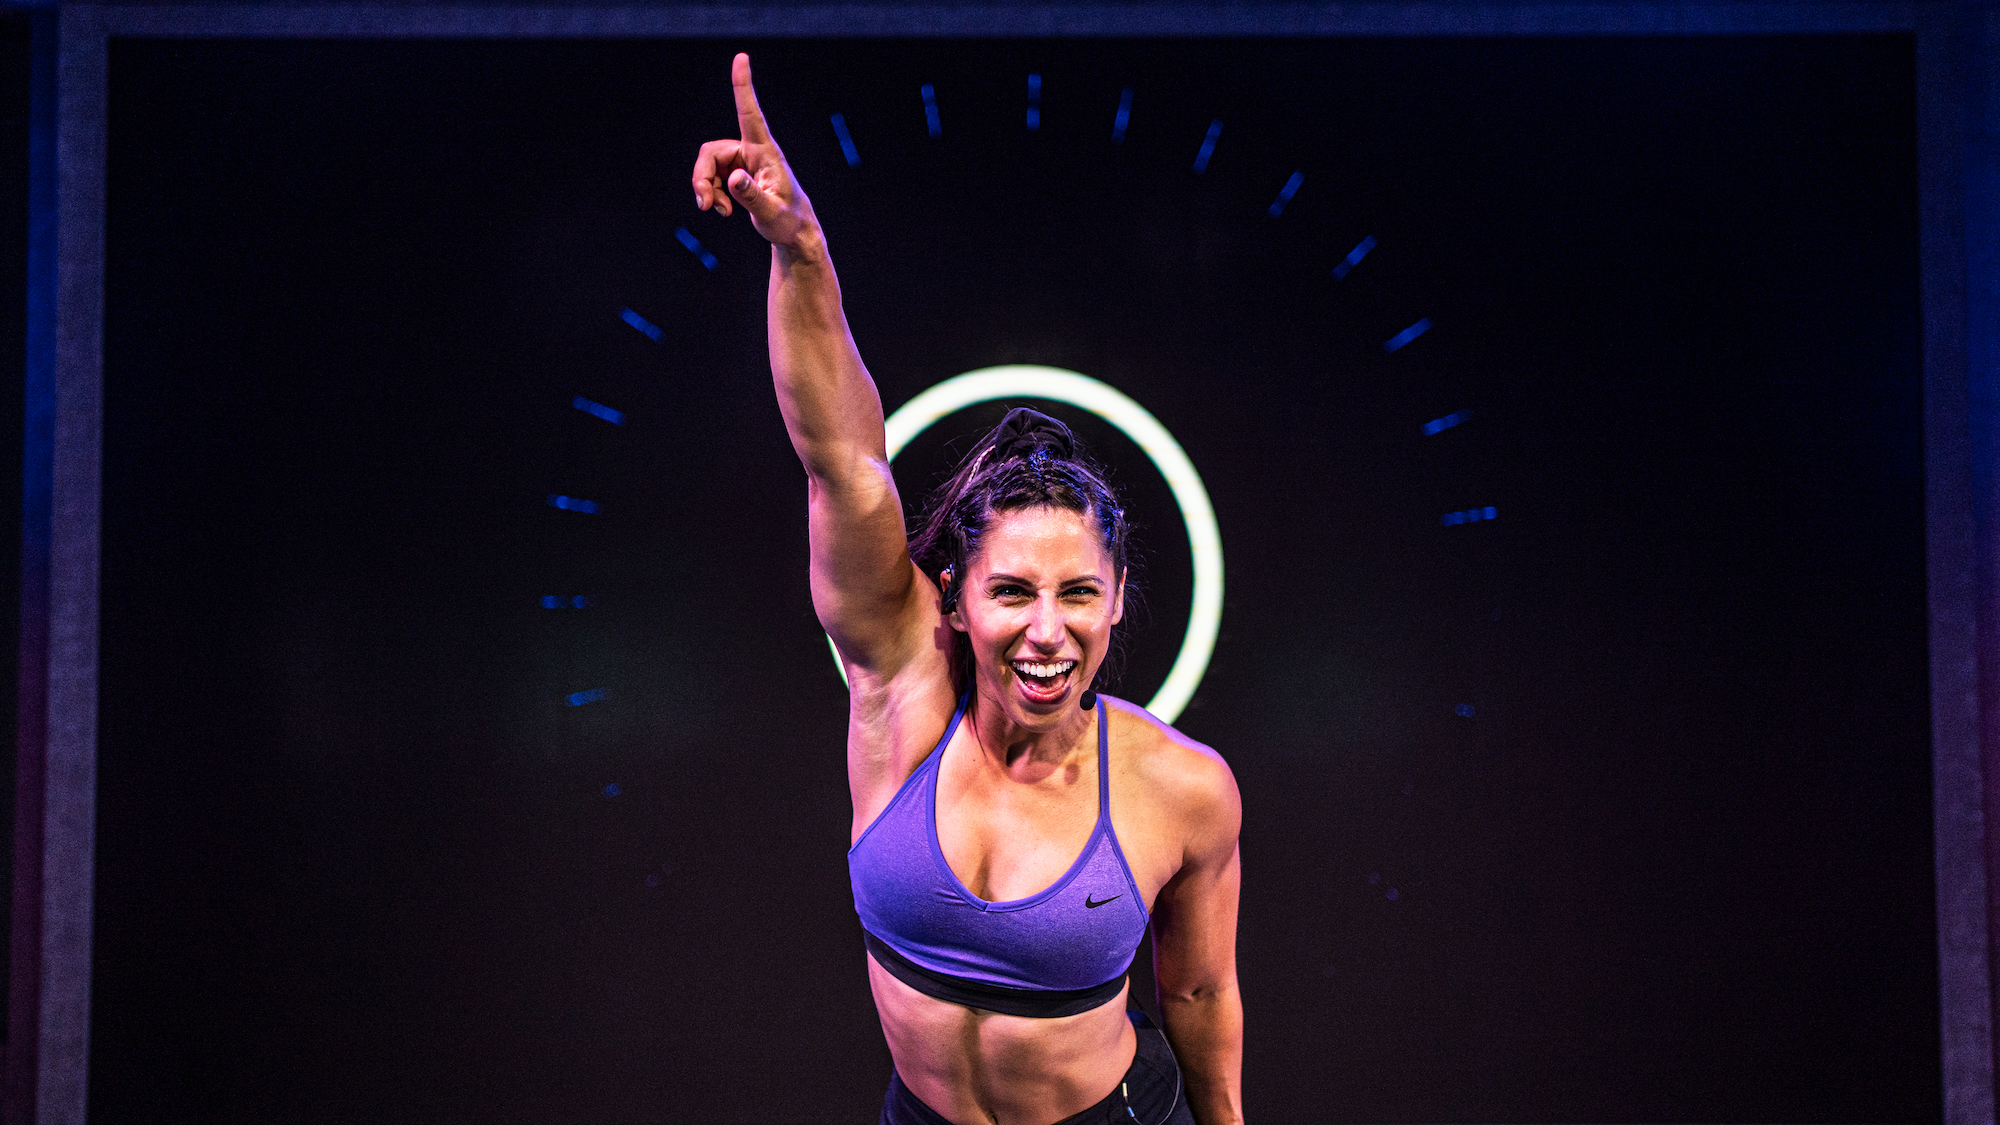 Fiit trainer and three-time American Ninja Warrior Angela Gargano pointing to the sky